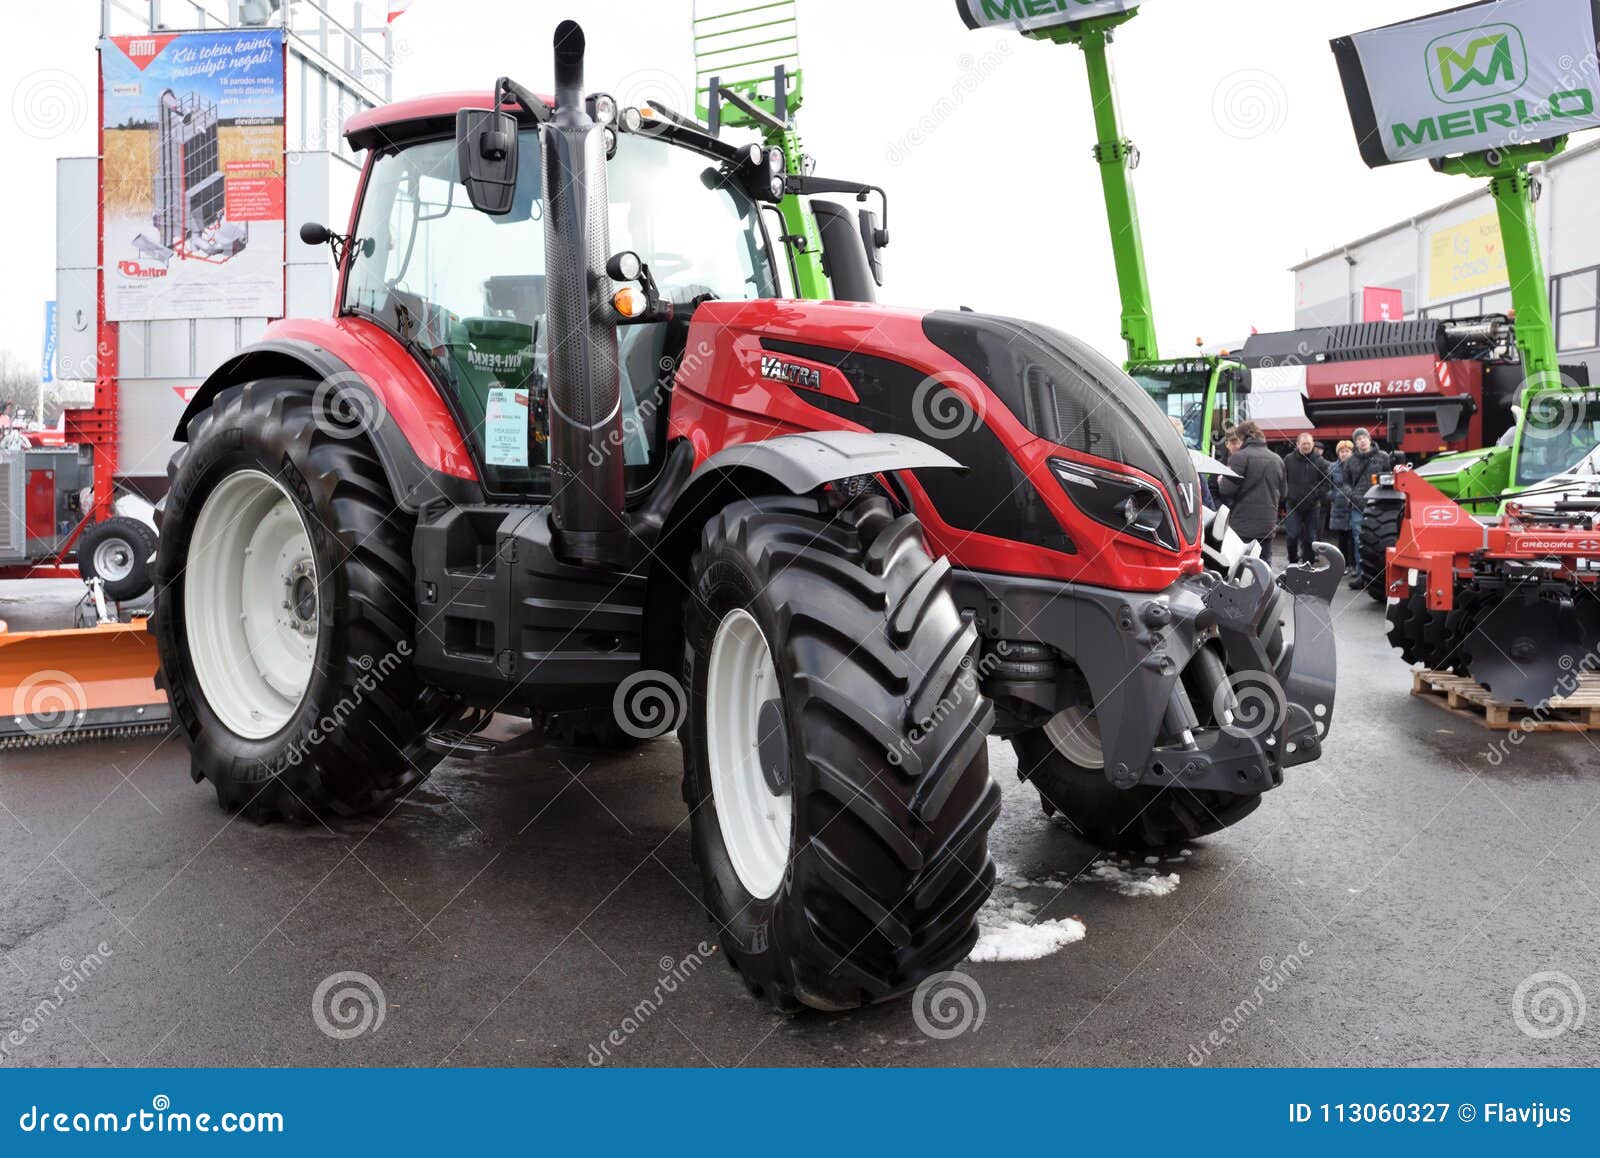 Valtra brand tractor photography. Image of farming - 113060327